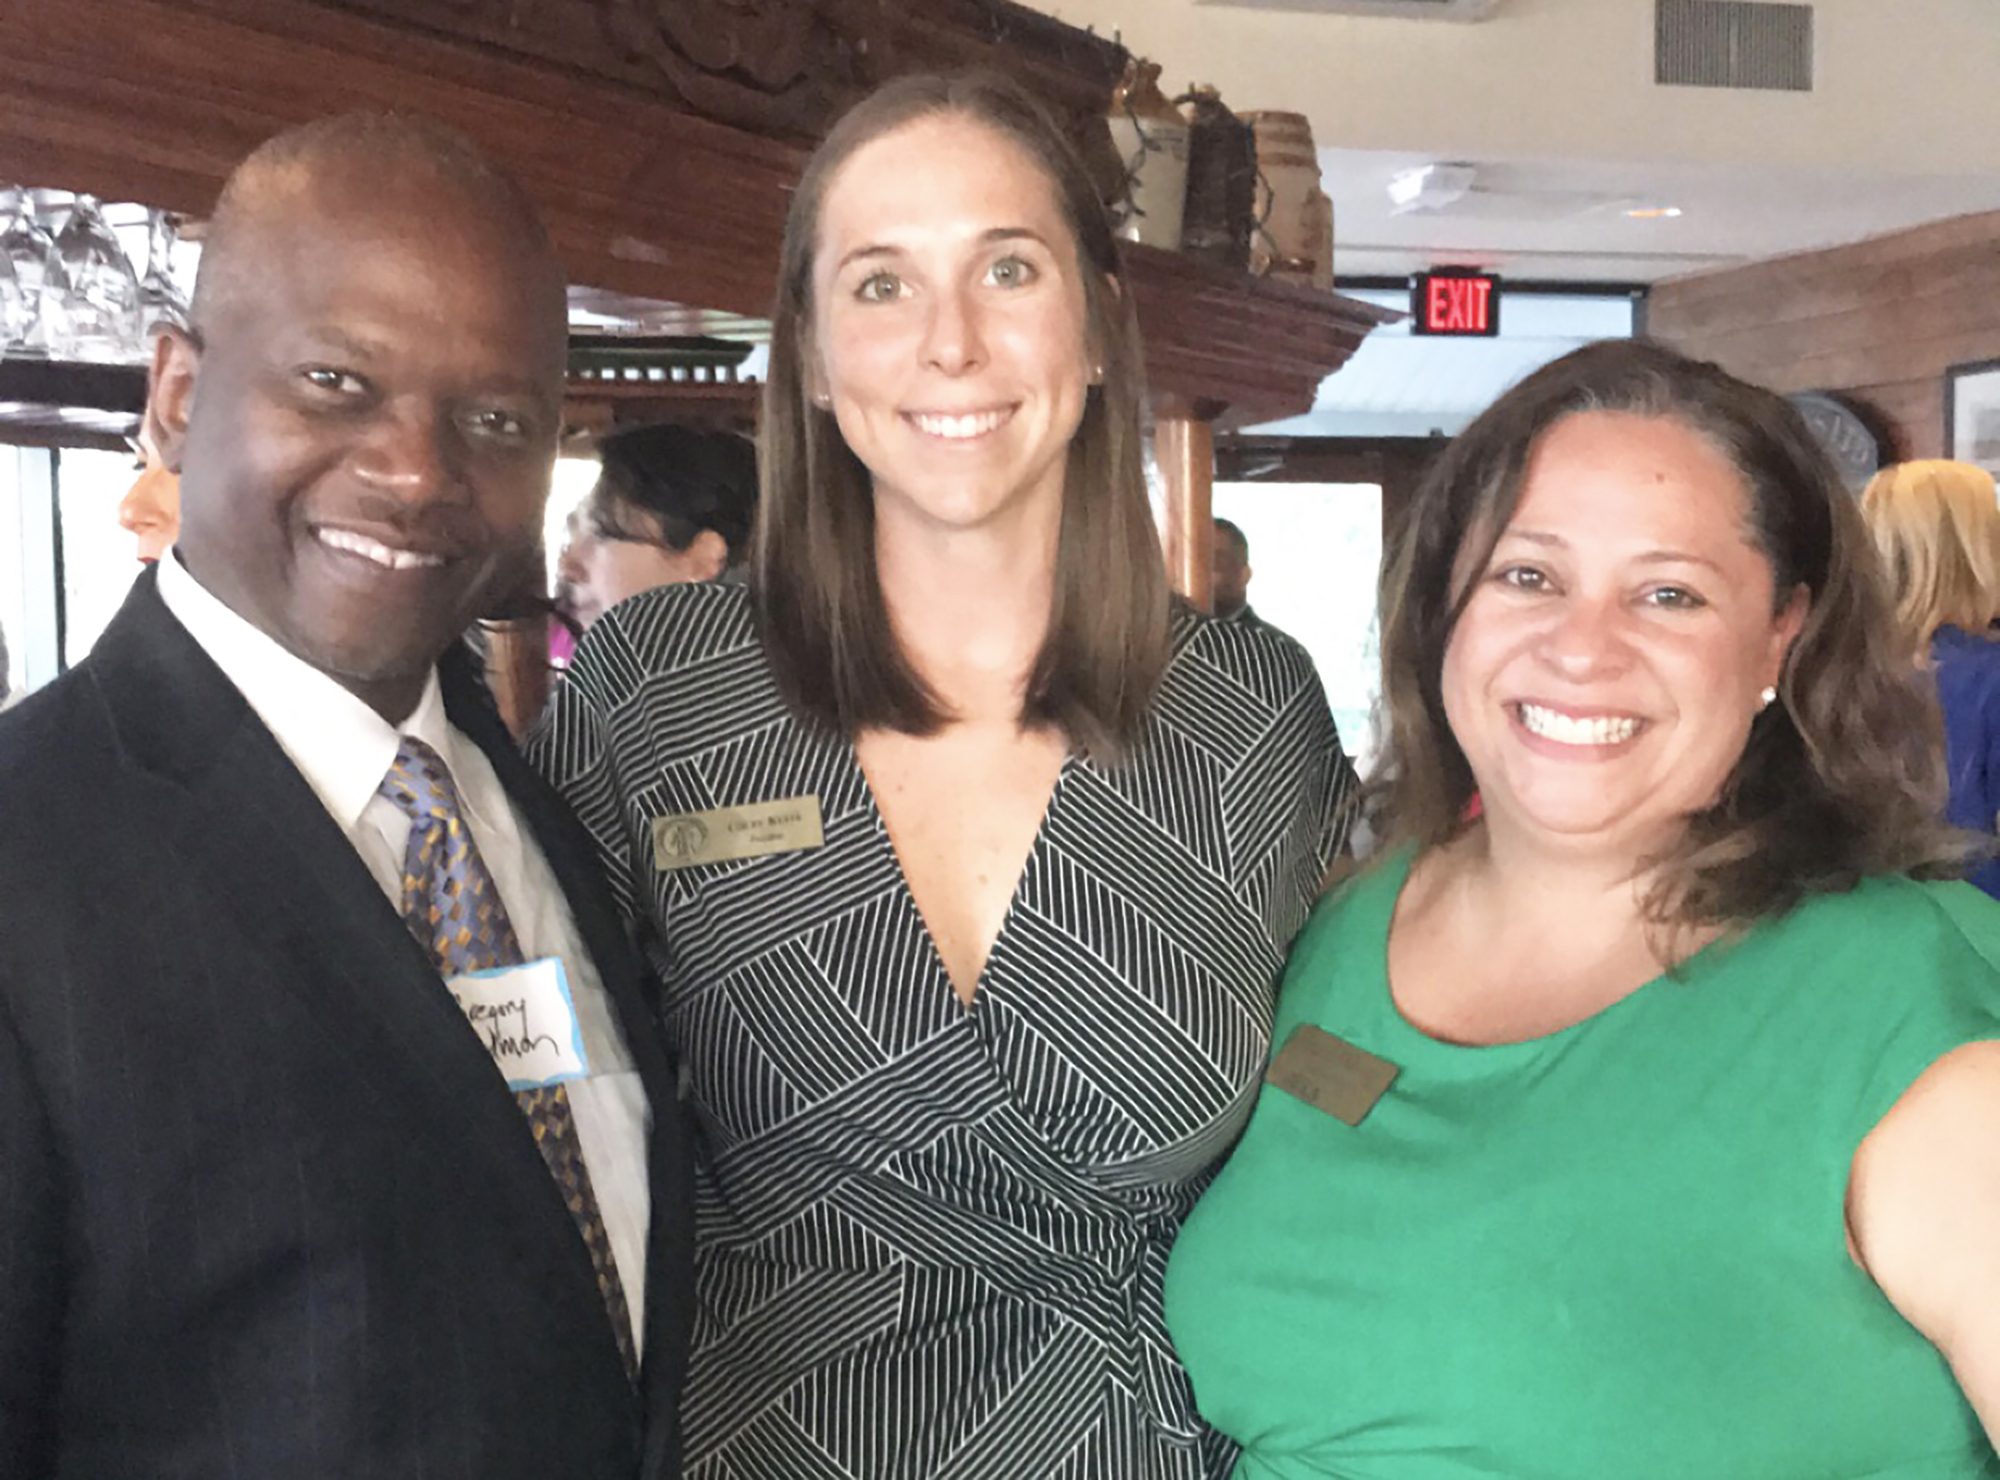 From left, D.W. Perkins President Gregory Redmon, St. Johns Association of Women Lawyers President Colby Keefe and JWLA Director of Programs Ingrid Suarez Osborn.